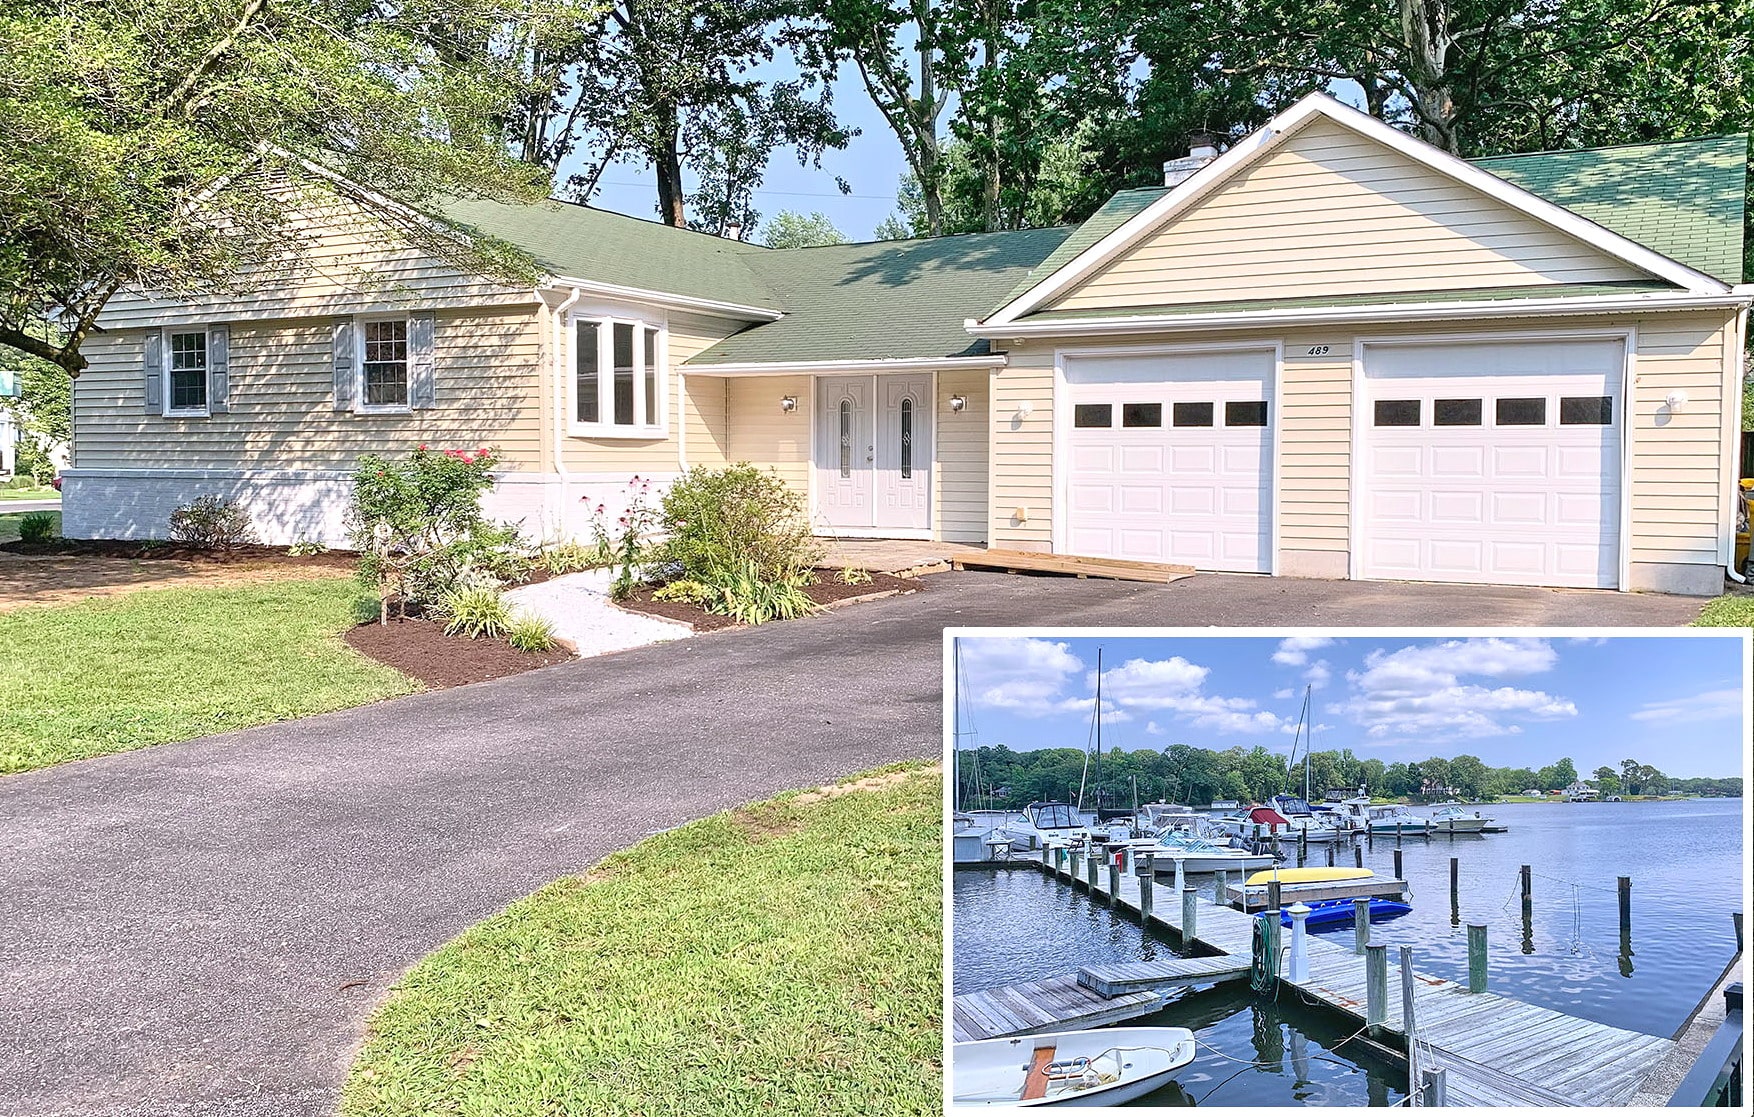 489 White Cedar Lan property exterior with view of boat docking area